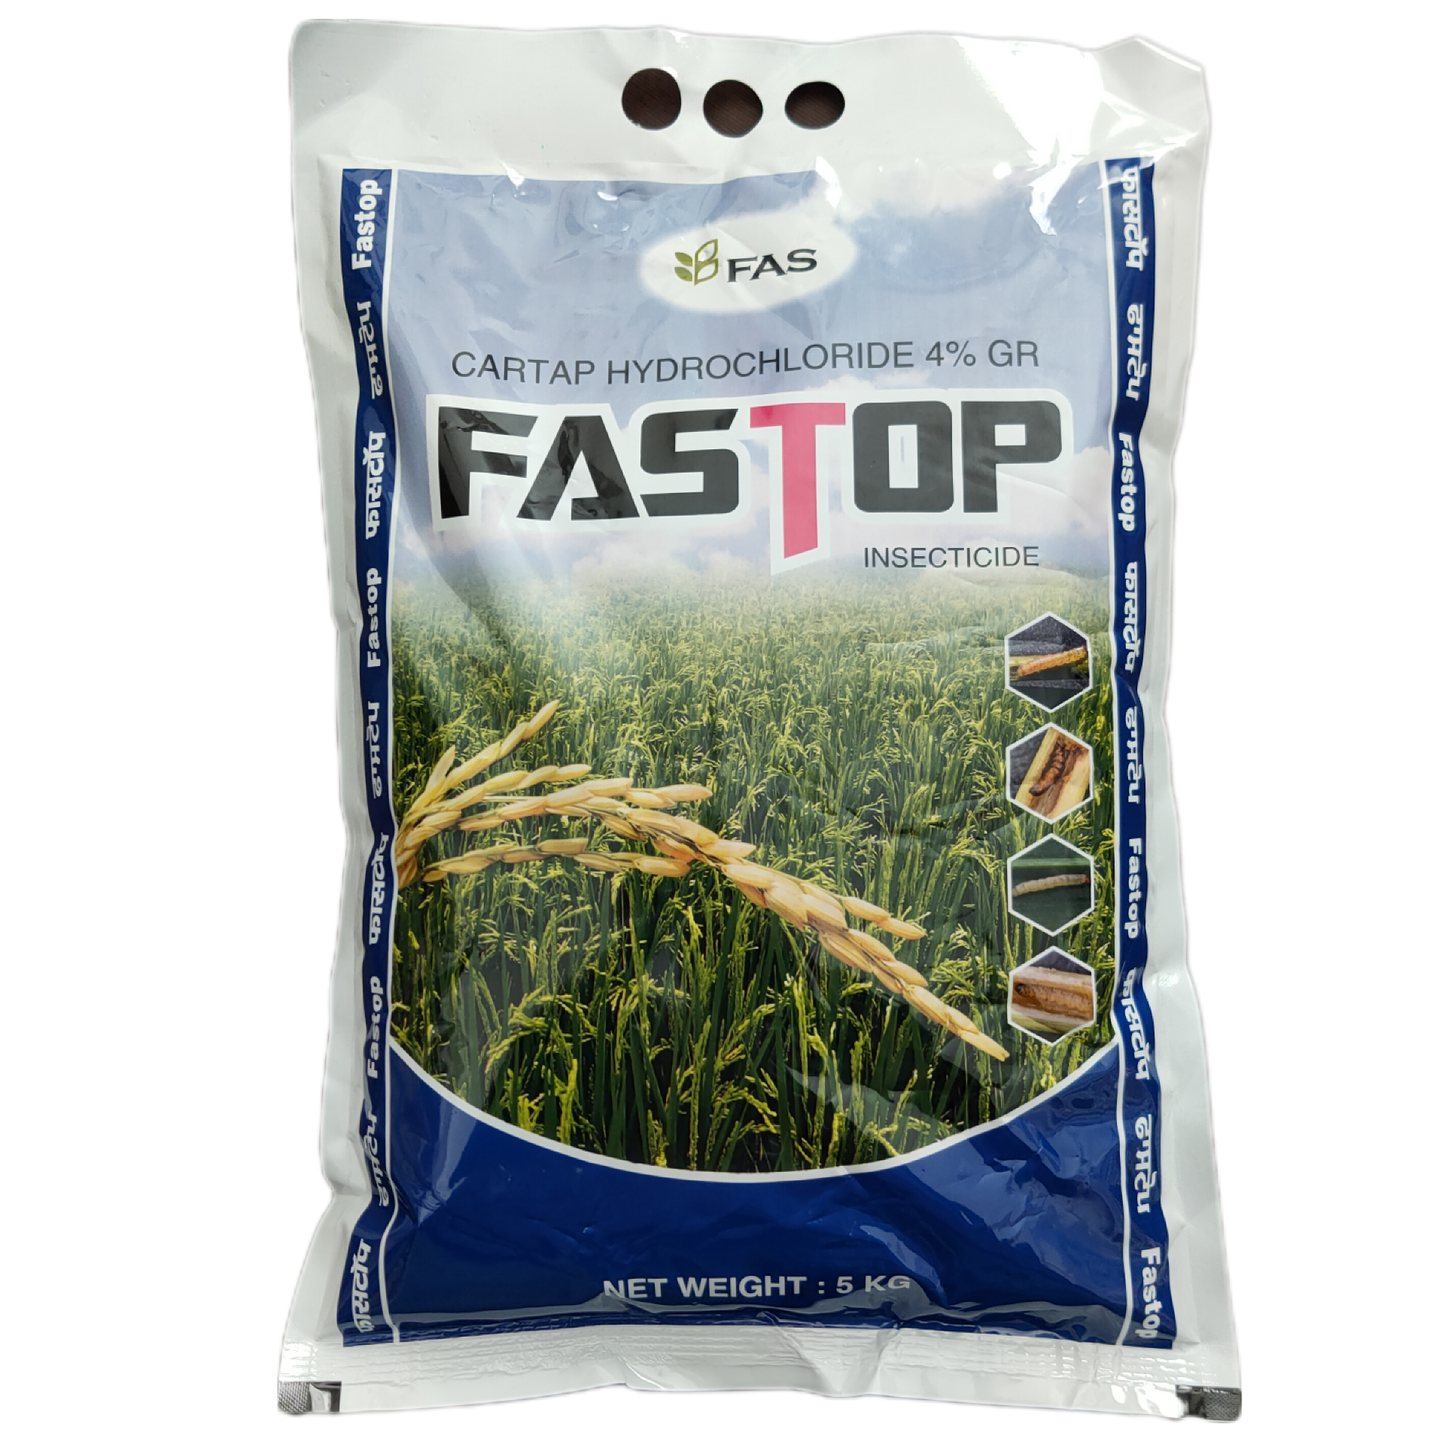 Fastop Cartap Hydrochloride 4% GR Insecticide